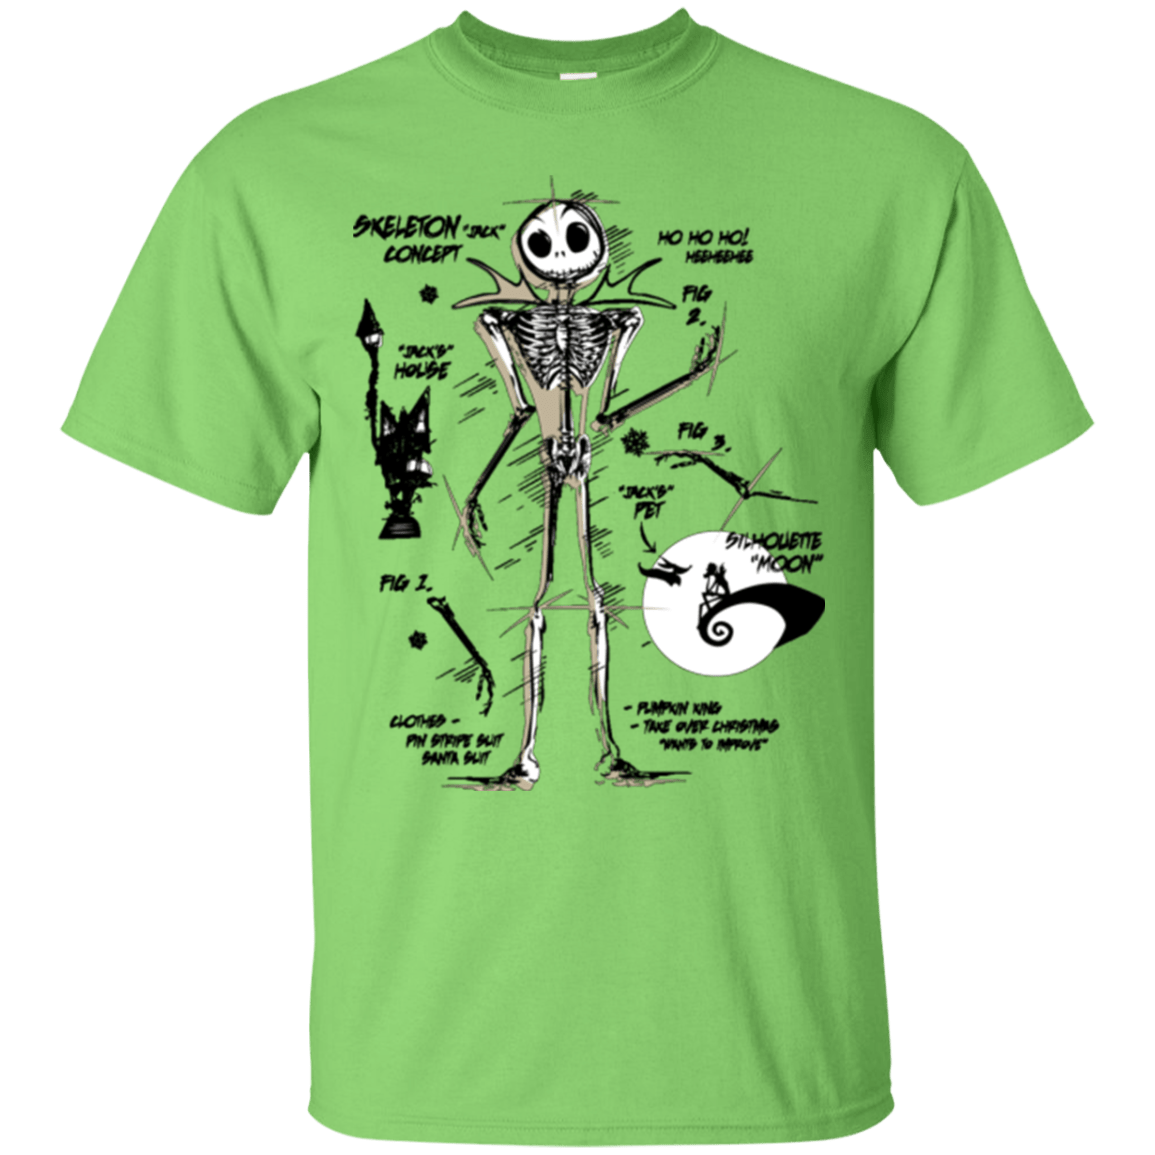 T-Shirts Lime / Small Skeleton Concept T-Shirt